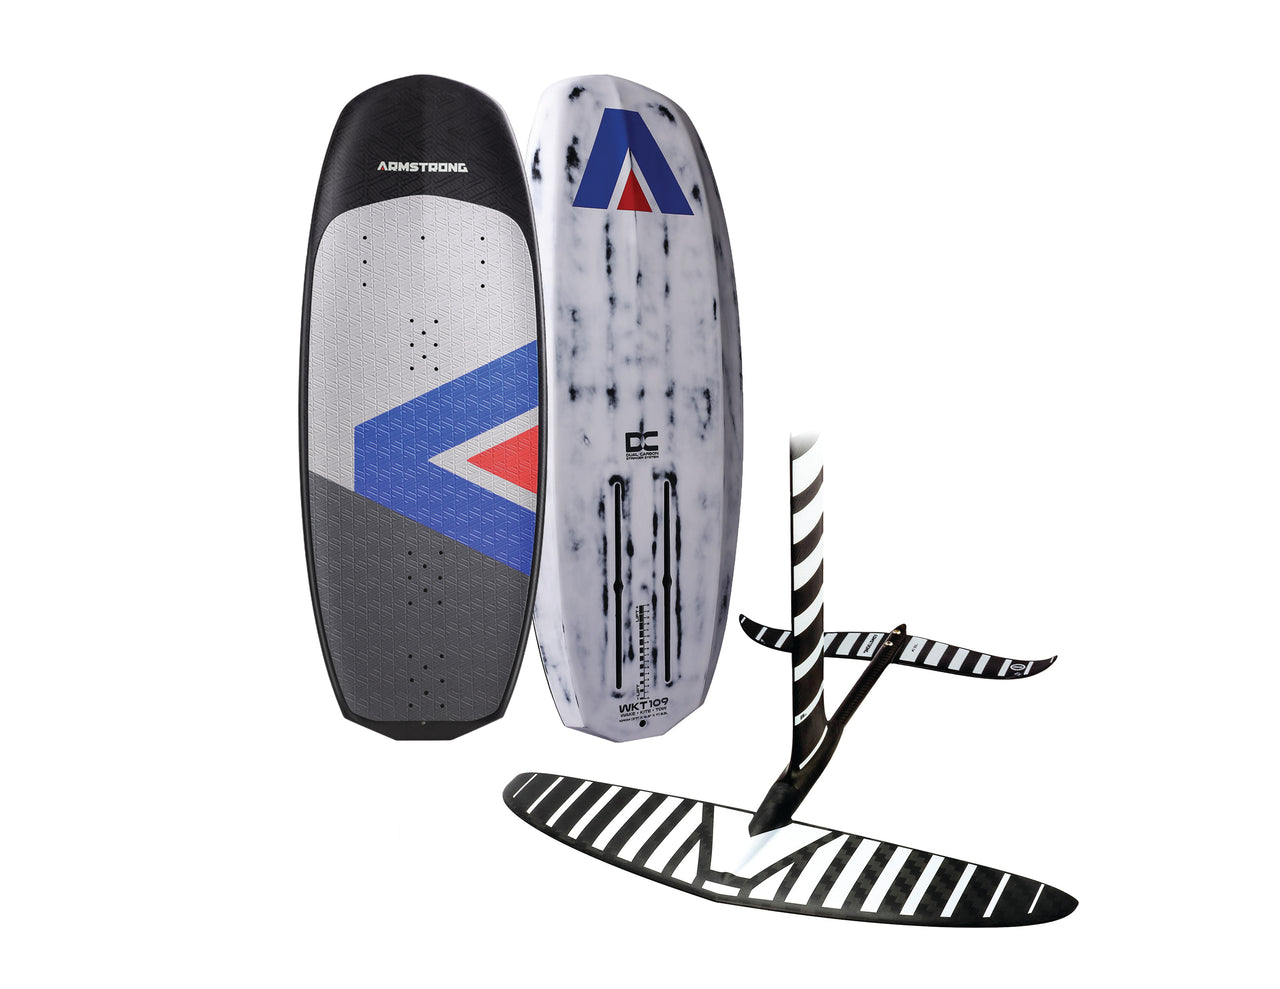 Armstrong Wakefoil Board W/ Armstrong HS850 Foil Kit Package